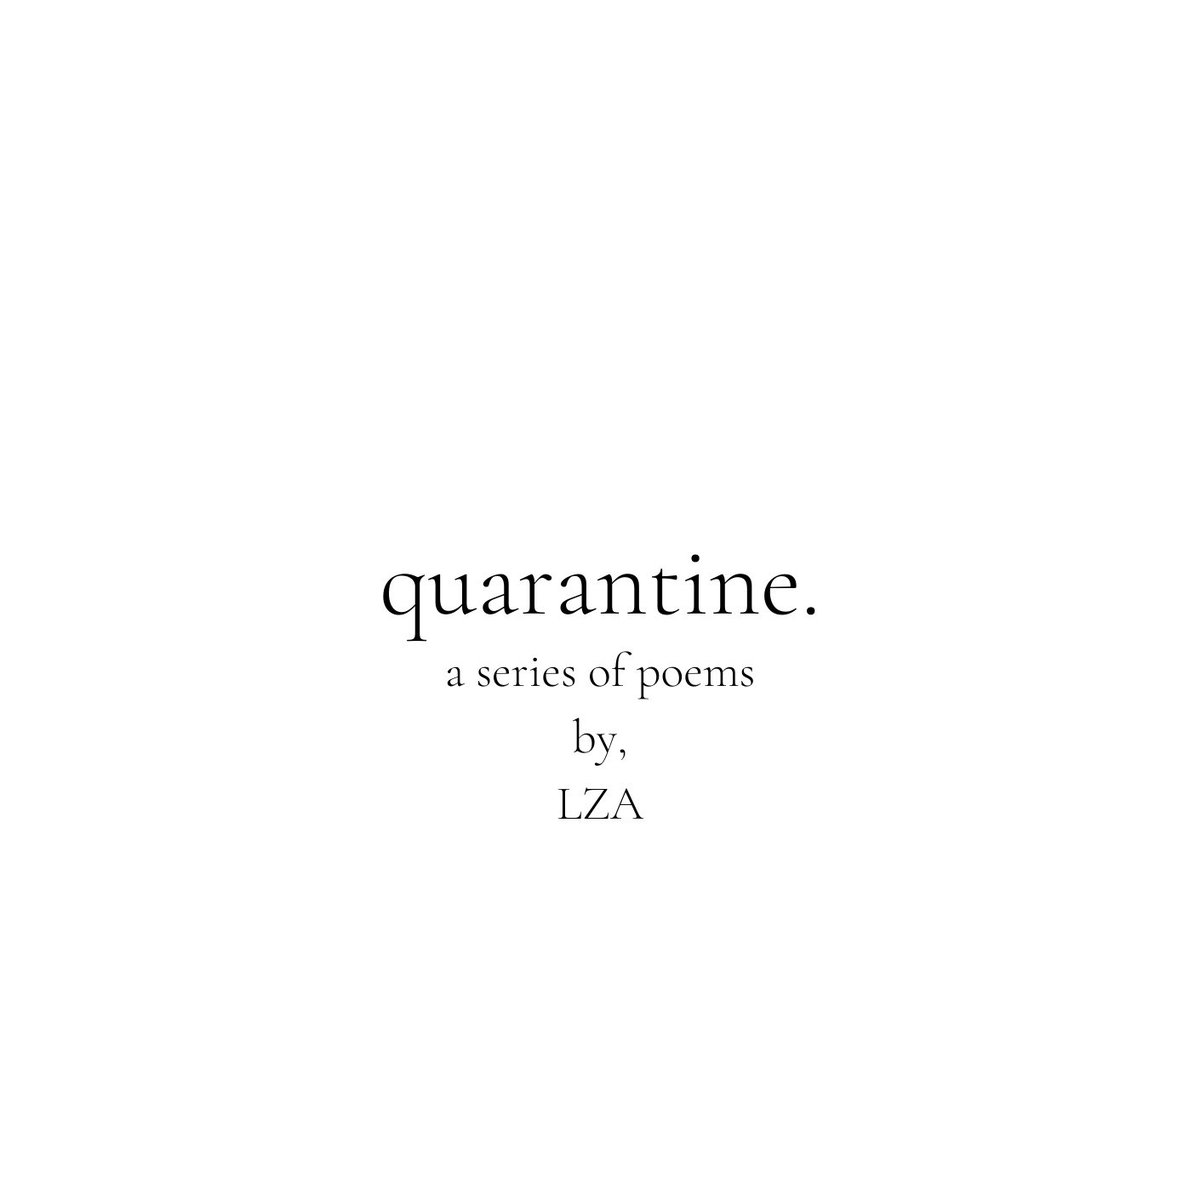 this a new step for me.i’ve kept this side hidden for a while.but i’m a writer.i was fearful of how the world may react to my words, but i knowthis a time we all need healing.so i present to you:  #quarantine. (a series of poems.) the first poem drops this friday.